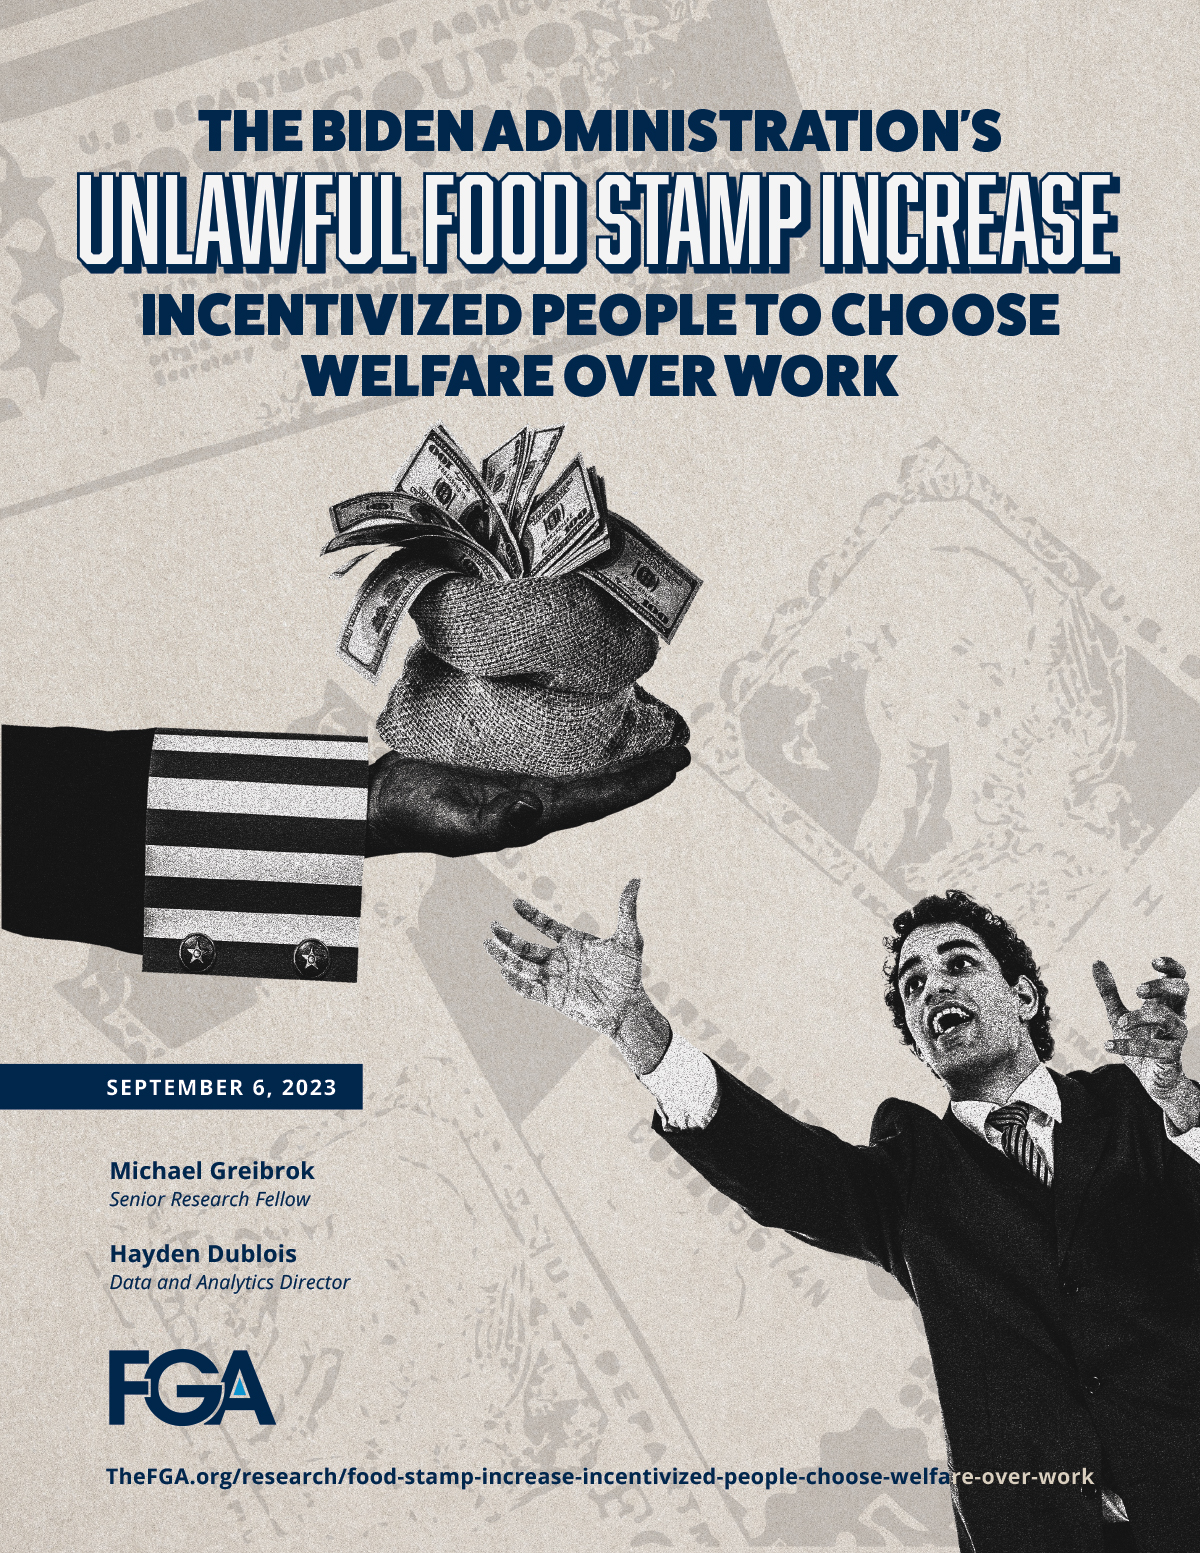 The Biden Administration’s Unlawful Food Stamp Increase Incentivized People to Choose Welfare Over Work